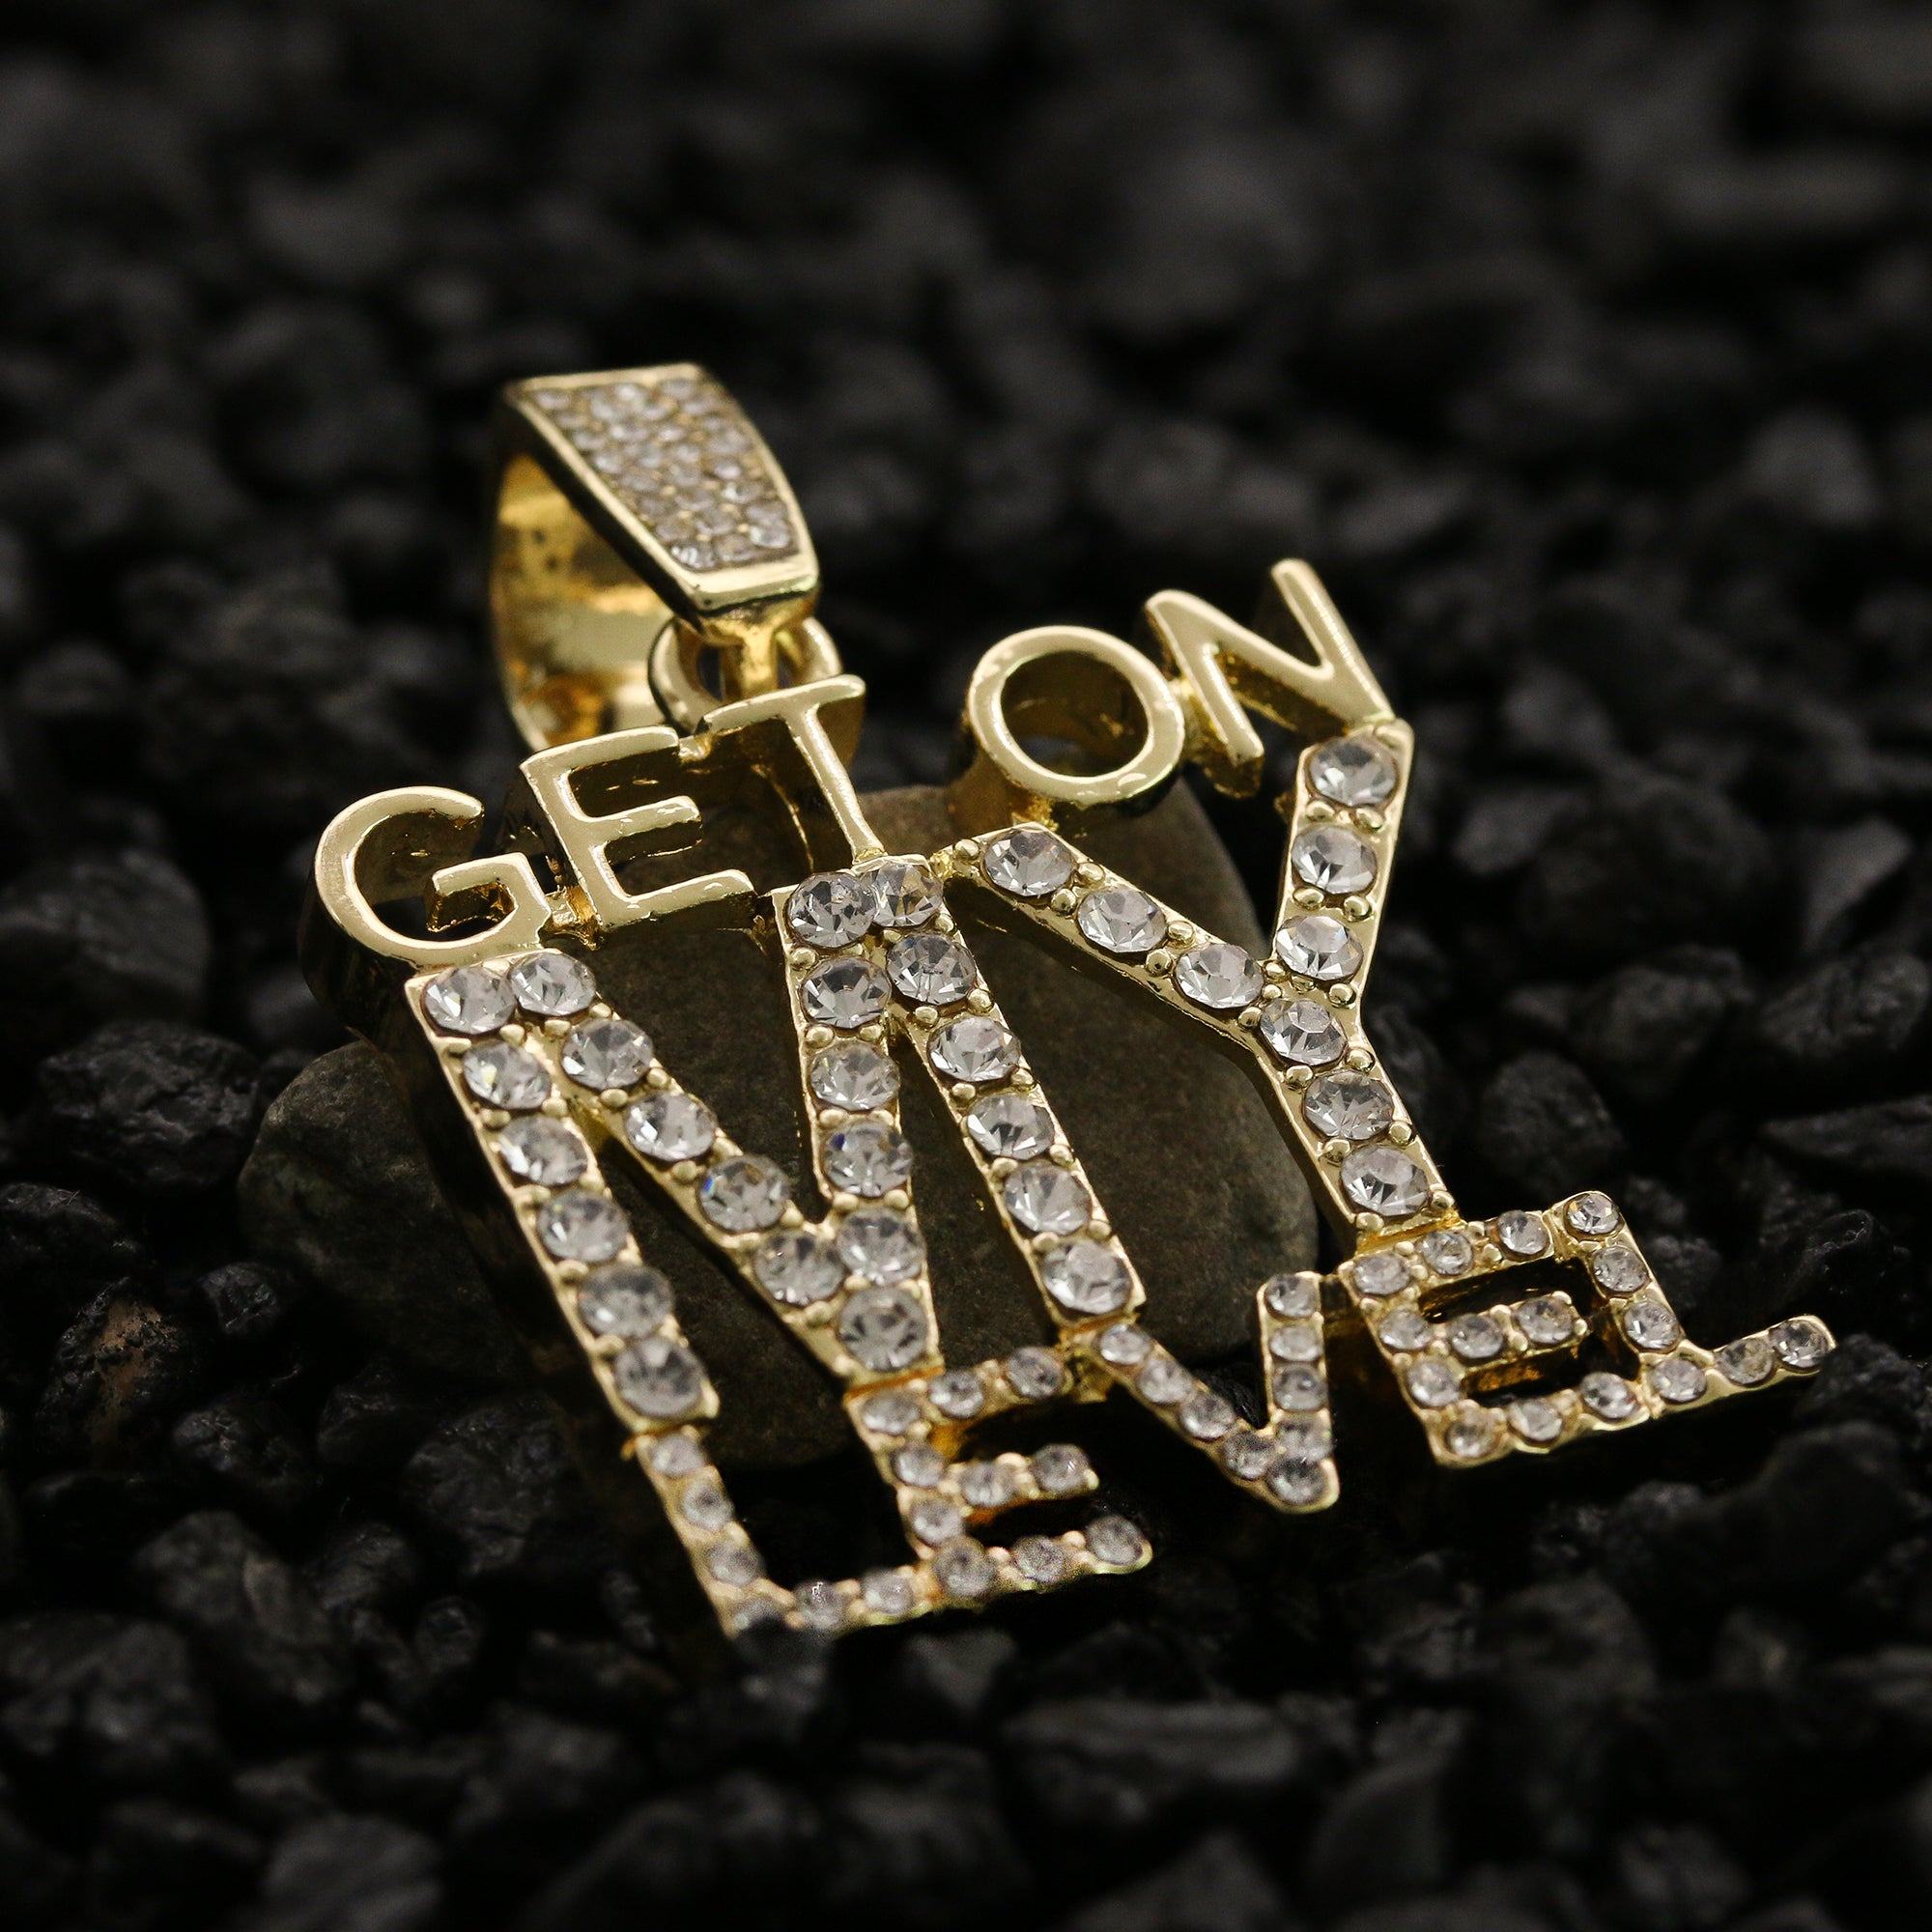 Get On My Level Pendant Rope Chain Men's Hip Hop 18k Cz Jewelry Necklace Choker